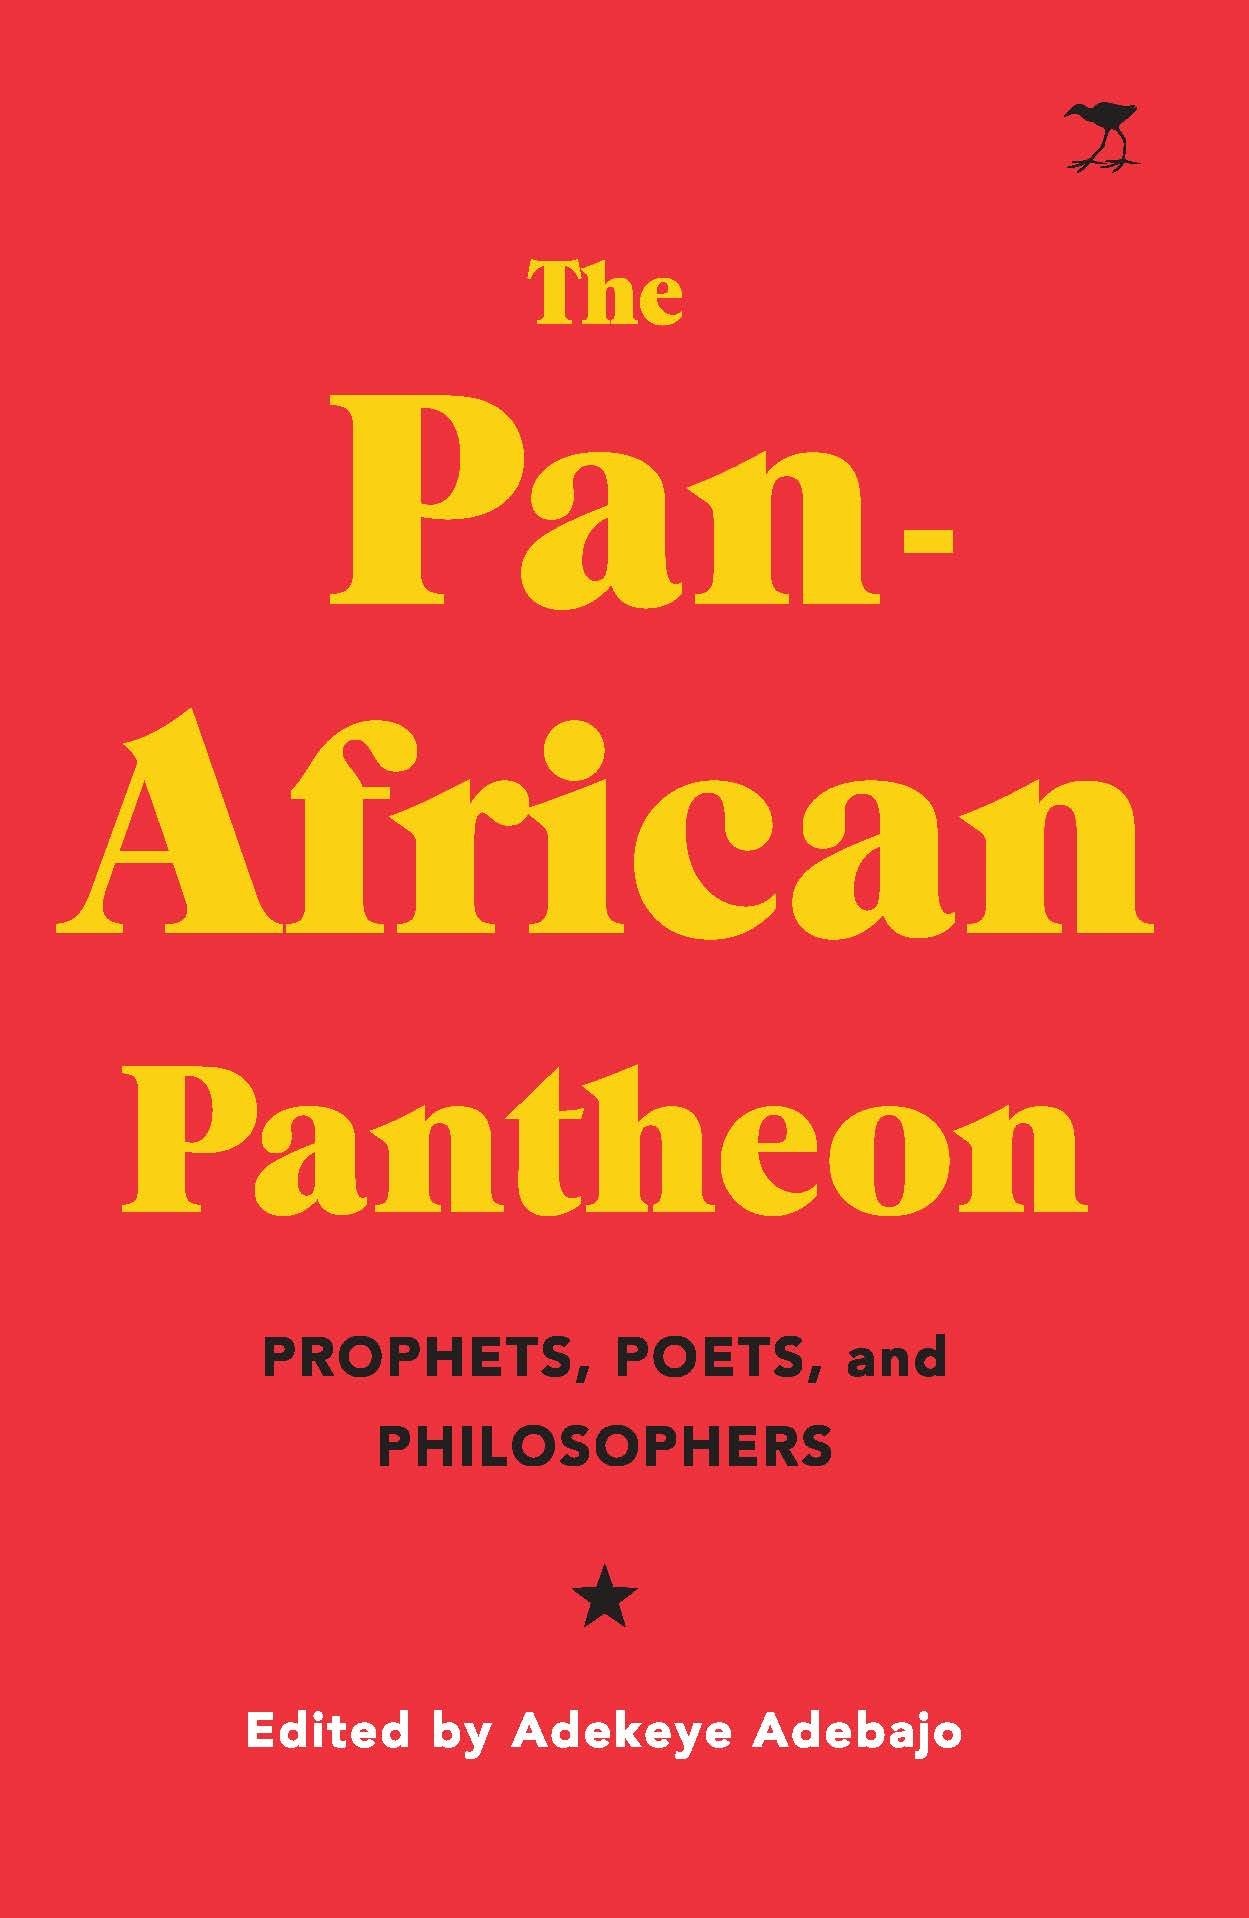 Book Review - The Pan-African Pantheon: Prophets, Poets and Philosophers